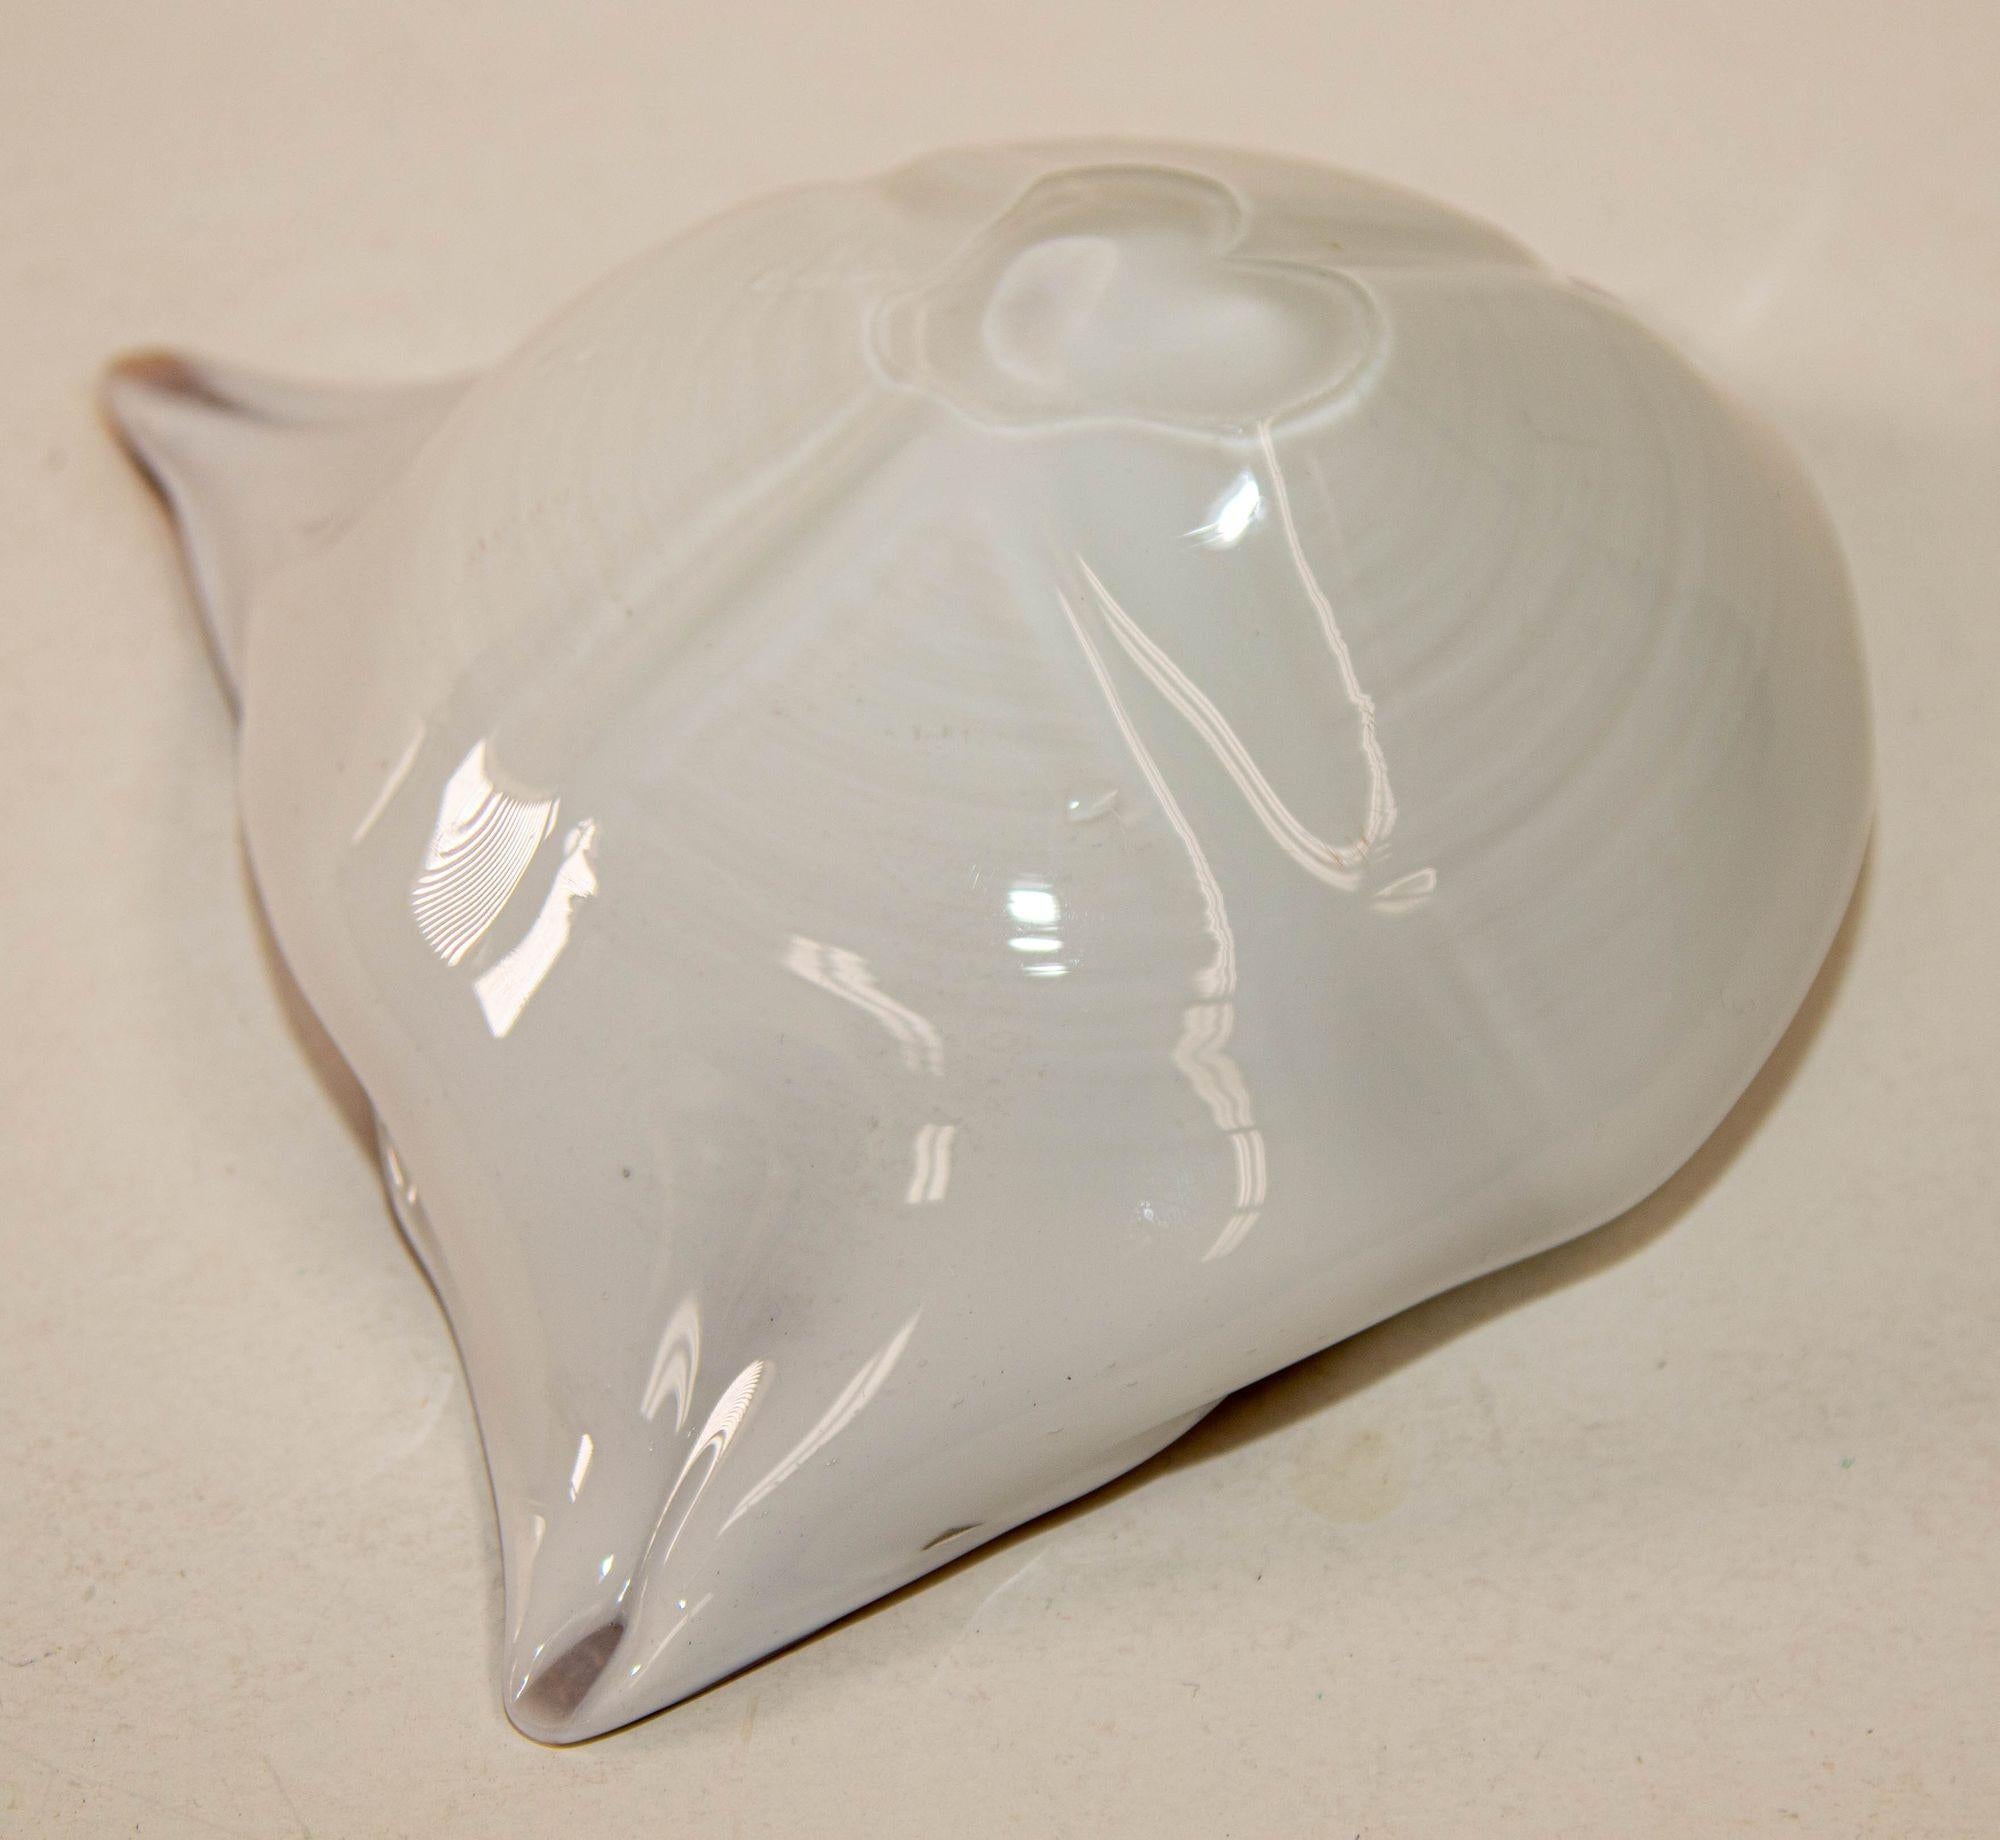 Murano Art Glass Manta Ray Tortoise Spotted Bowl Ashtray Vintage 1960s For Sale 4